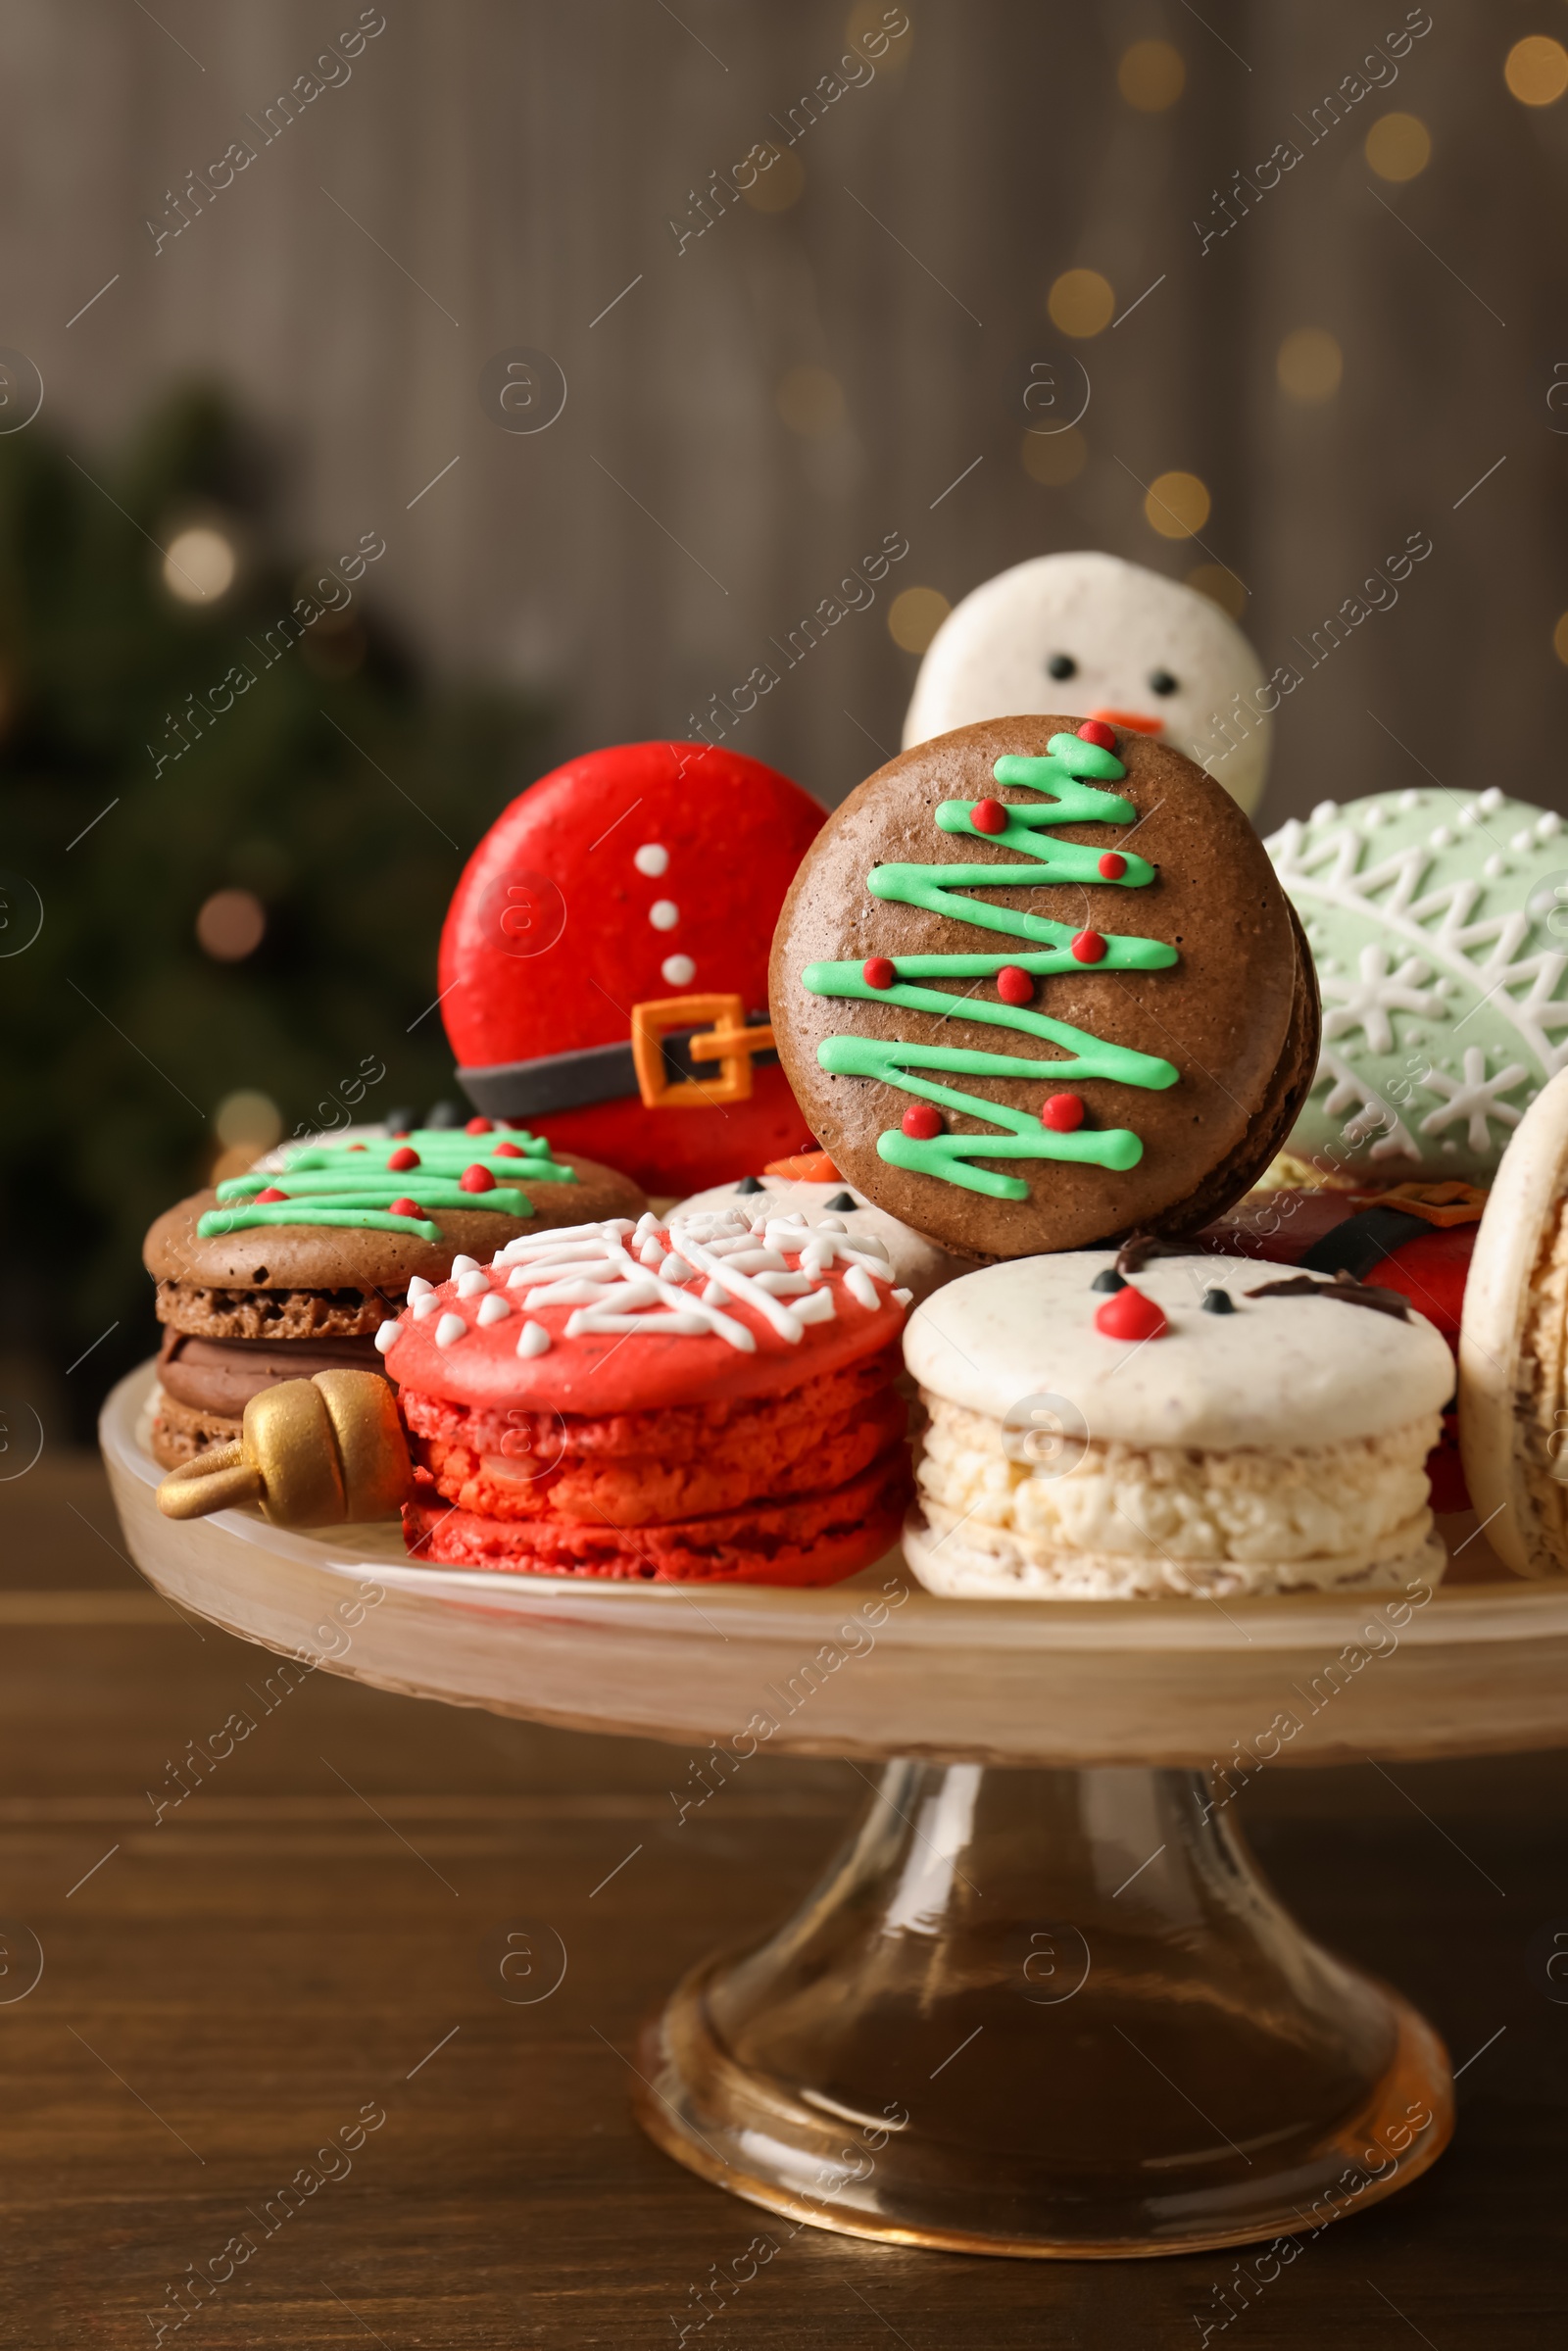 Photo of Stand with beautifully decorated Christmas macarons on wooden table against blurred festive lights